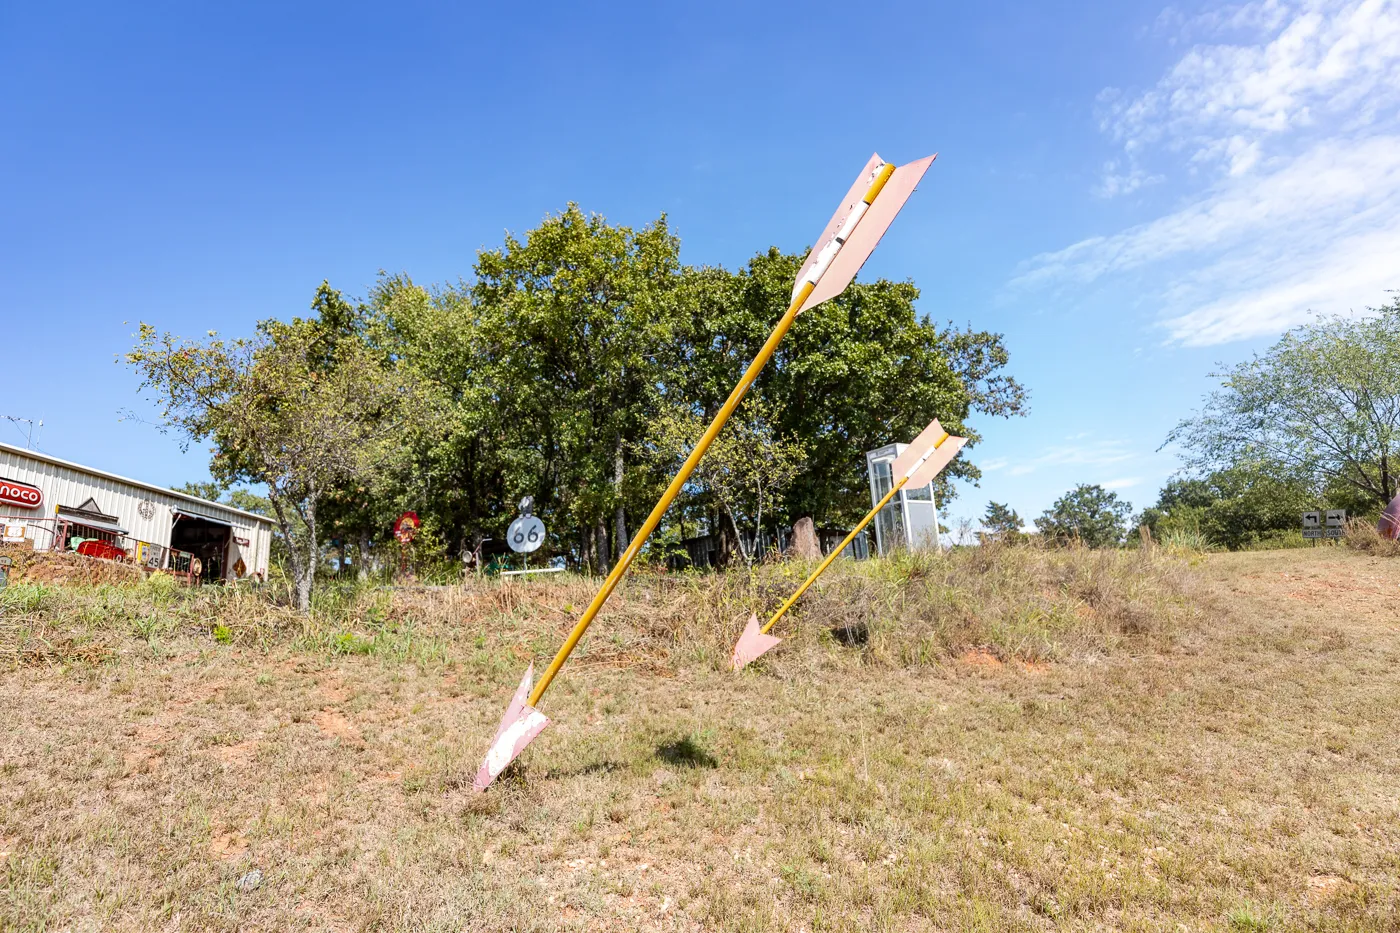 Twin arrows at OK County 66 - John's Place in Arcadia, Oklahoma - reproductions of famous Route 66 roadside attractions